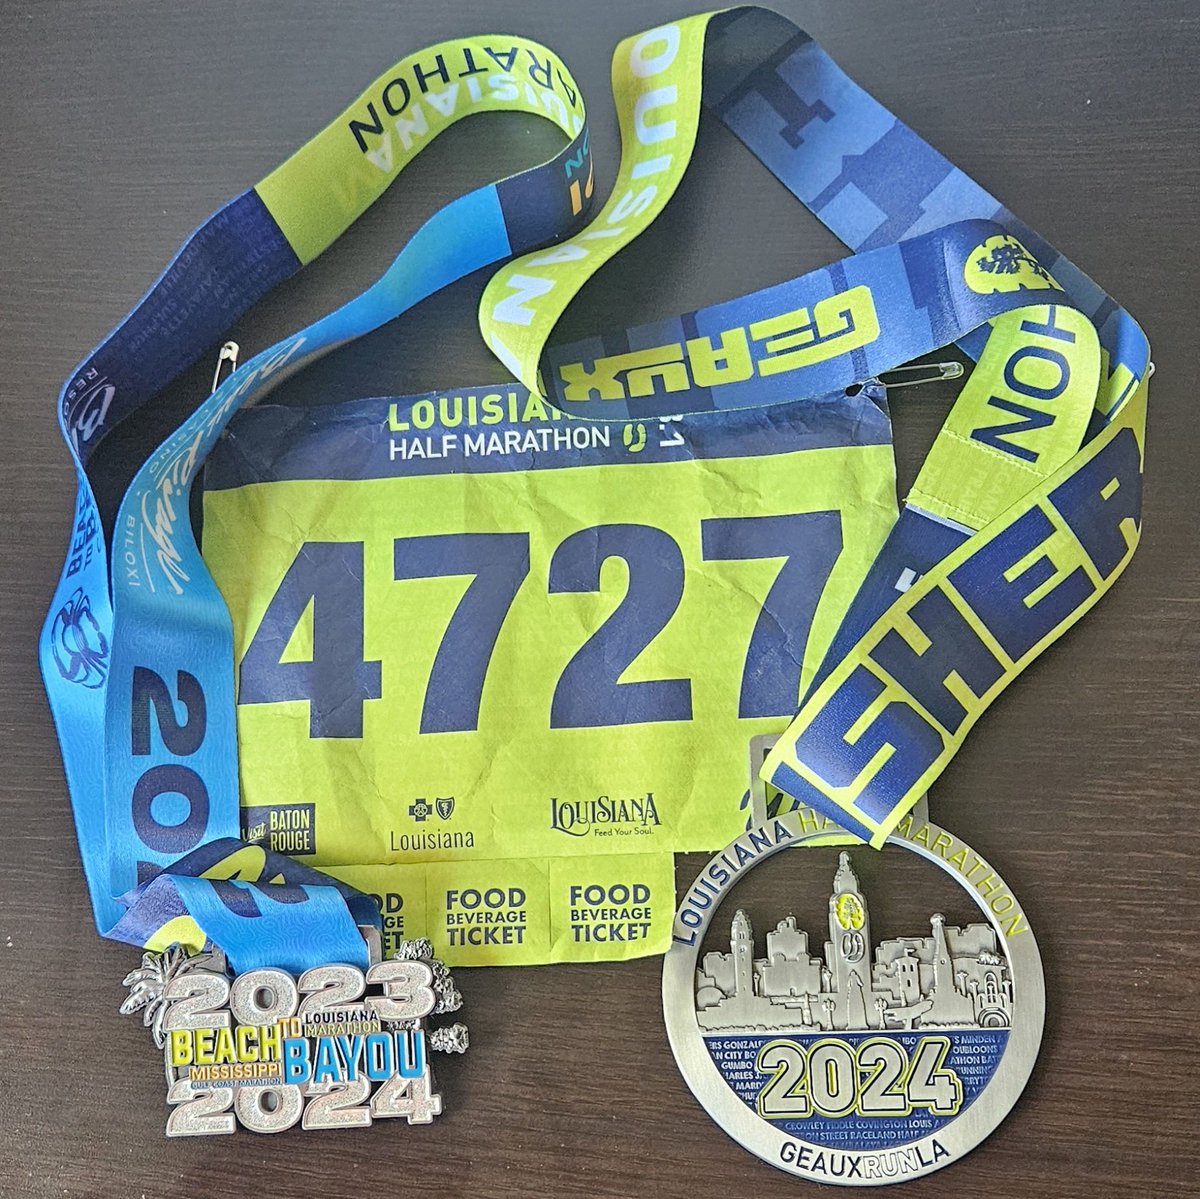 Happy Medal Monday! The first Medal Monday of 2024 is in honor of the @thelamarathon. Great race, nice runners, and a beautiful course. 
#thelamarathonbr #leagueofgarmin #BibChat #runchat #runatl #womensrunningcommunity #letsgeaux